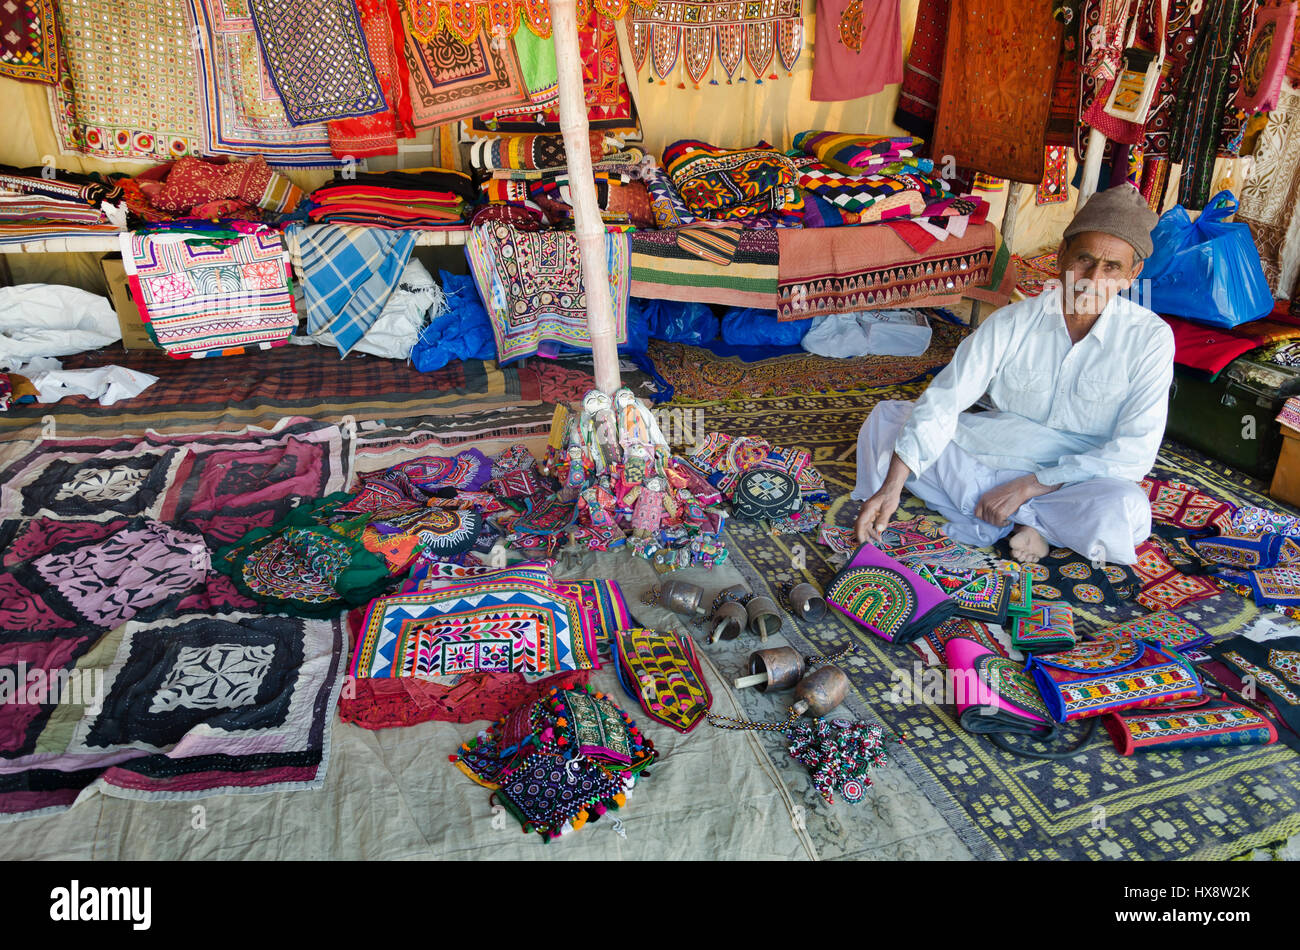 KUTCH, GUJARAT, INDIA - DECEMBER 27, 2016: An unidentified handicraft vendor in his traditional street shop selling colourful embroidery items. Stock Photo